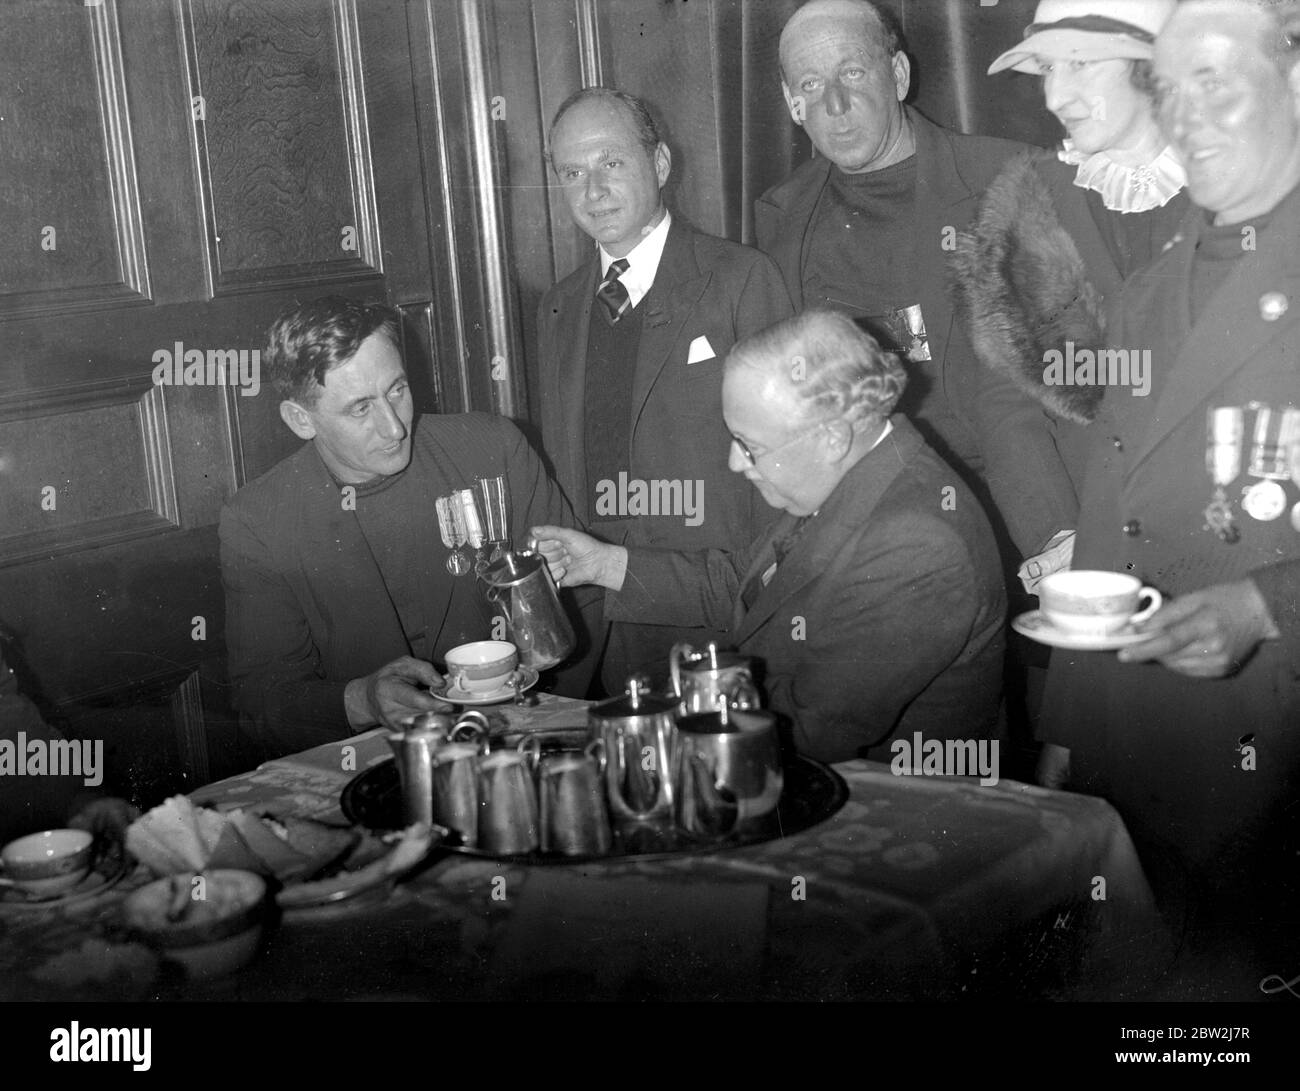 Skipper Cecil Richards of Hosebud and Sir Kingsley Wood (Minister of Health) take tea after presenting the petition brought by nine newlyn fishermen protesting against the demolition of their cottage homes, condemed under a slum clearance scheme. 22 October 1937 Stock Photo